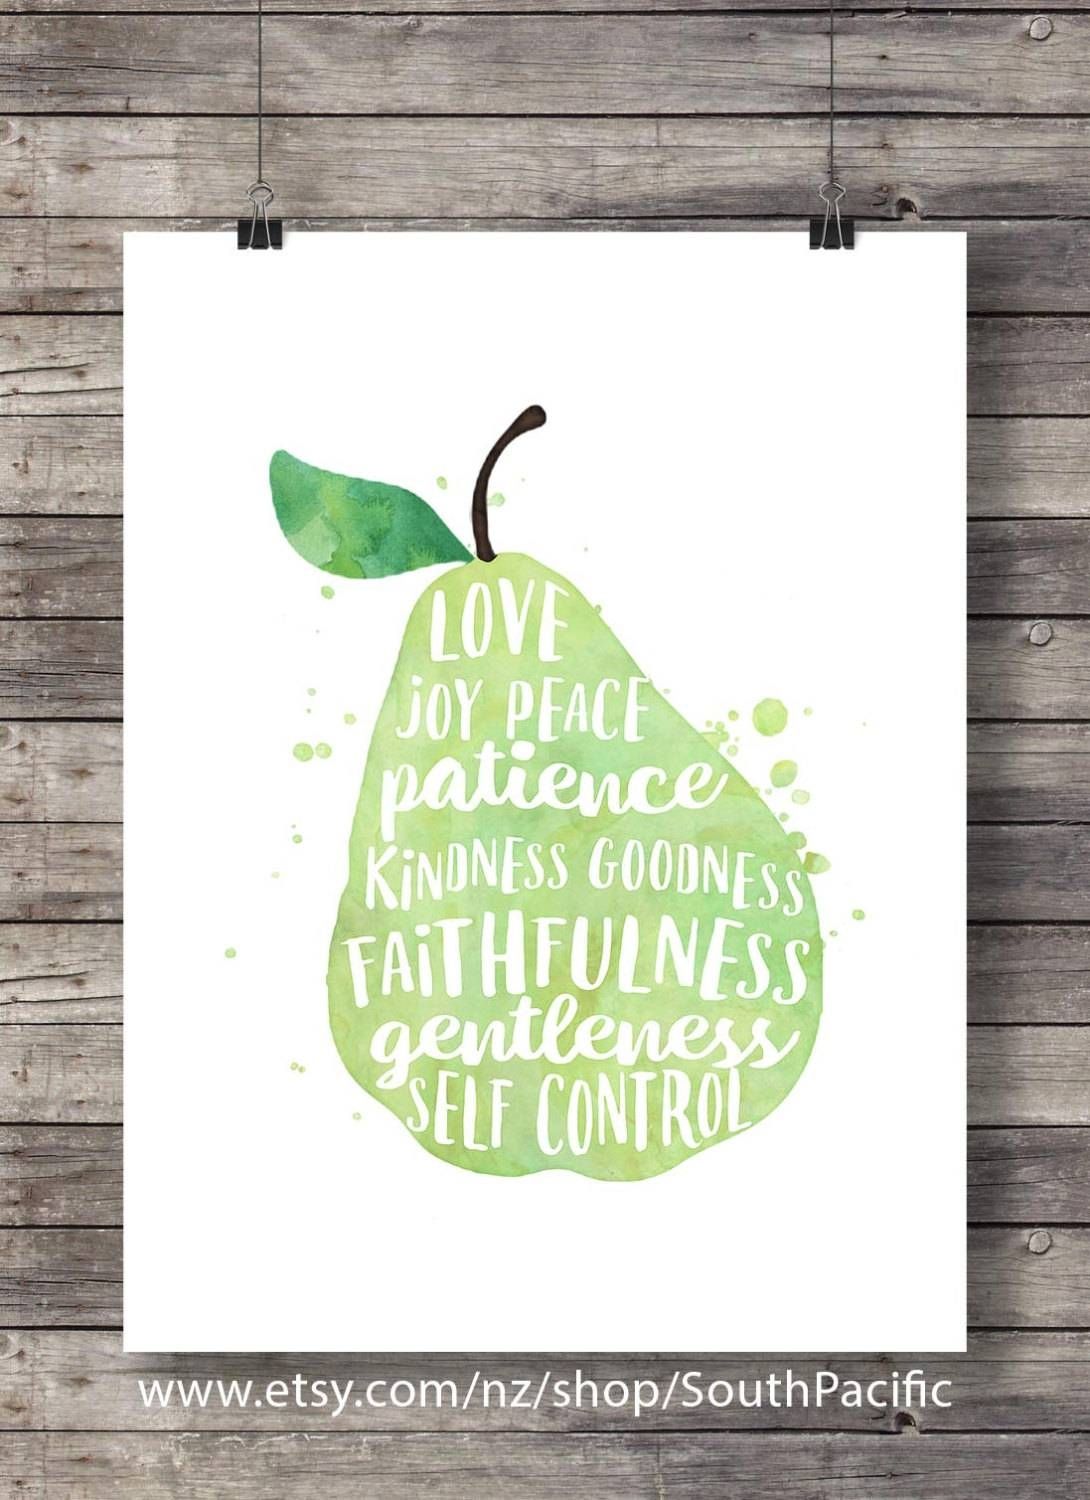 Fruit Of The Spirit Galatians 5:22 Pear Watercolor Intended For Most Recent Fruit Of The Spirit Wall Art (View 18 of 30)